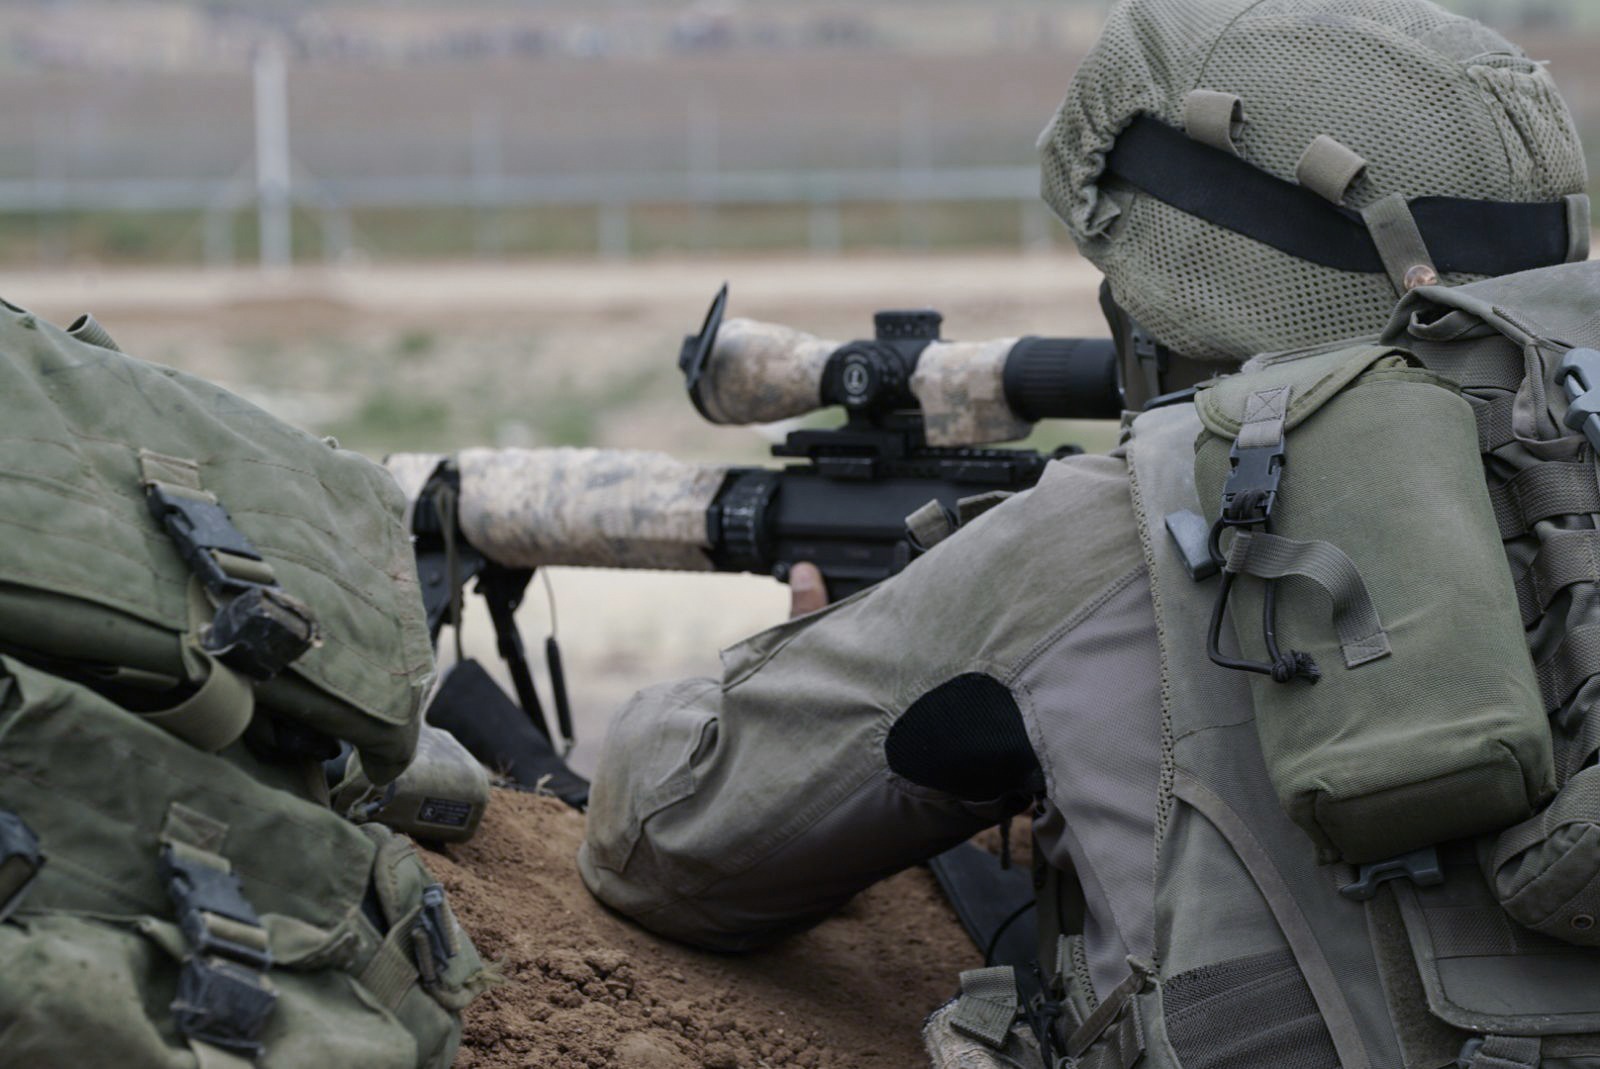 Illustrative: Israeli snipers prepare for massive protests by Palestinians in Gaza and the potential for demonstrators to try to breach the security fence on March 30, 2018. (Israel Defense Forces/File)